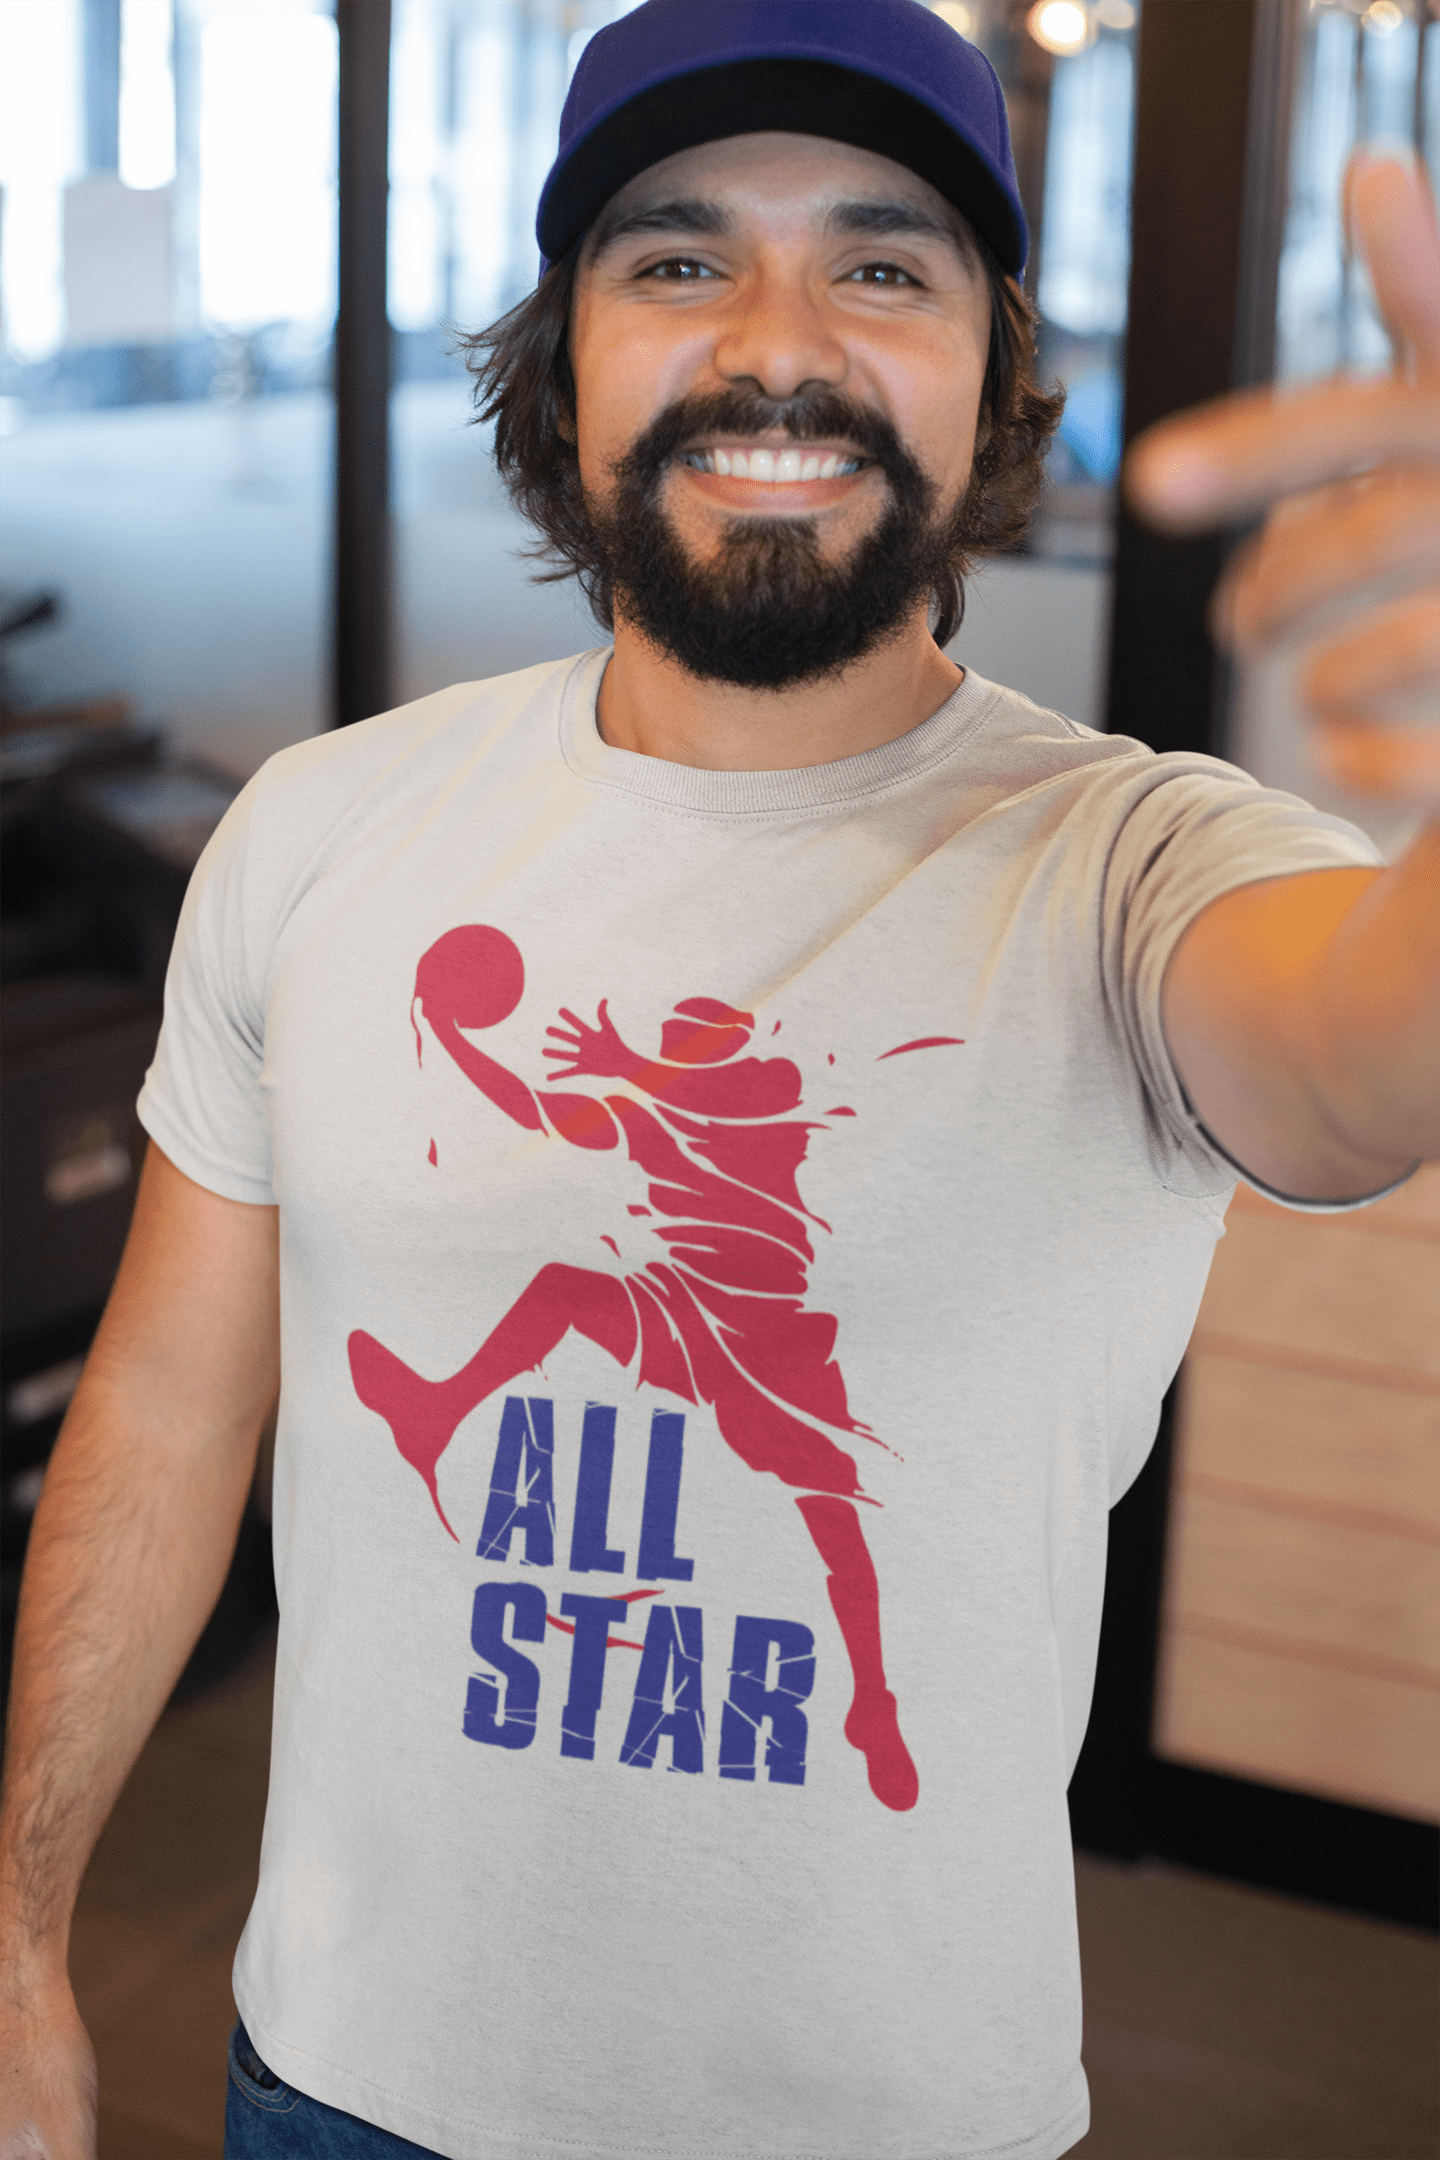 Men's Graphic T-Shirt All Star Basketball Player Vintage White